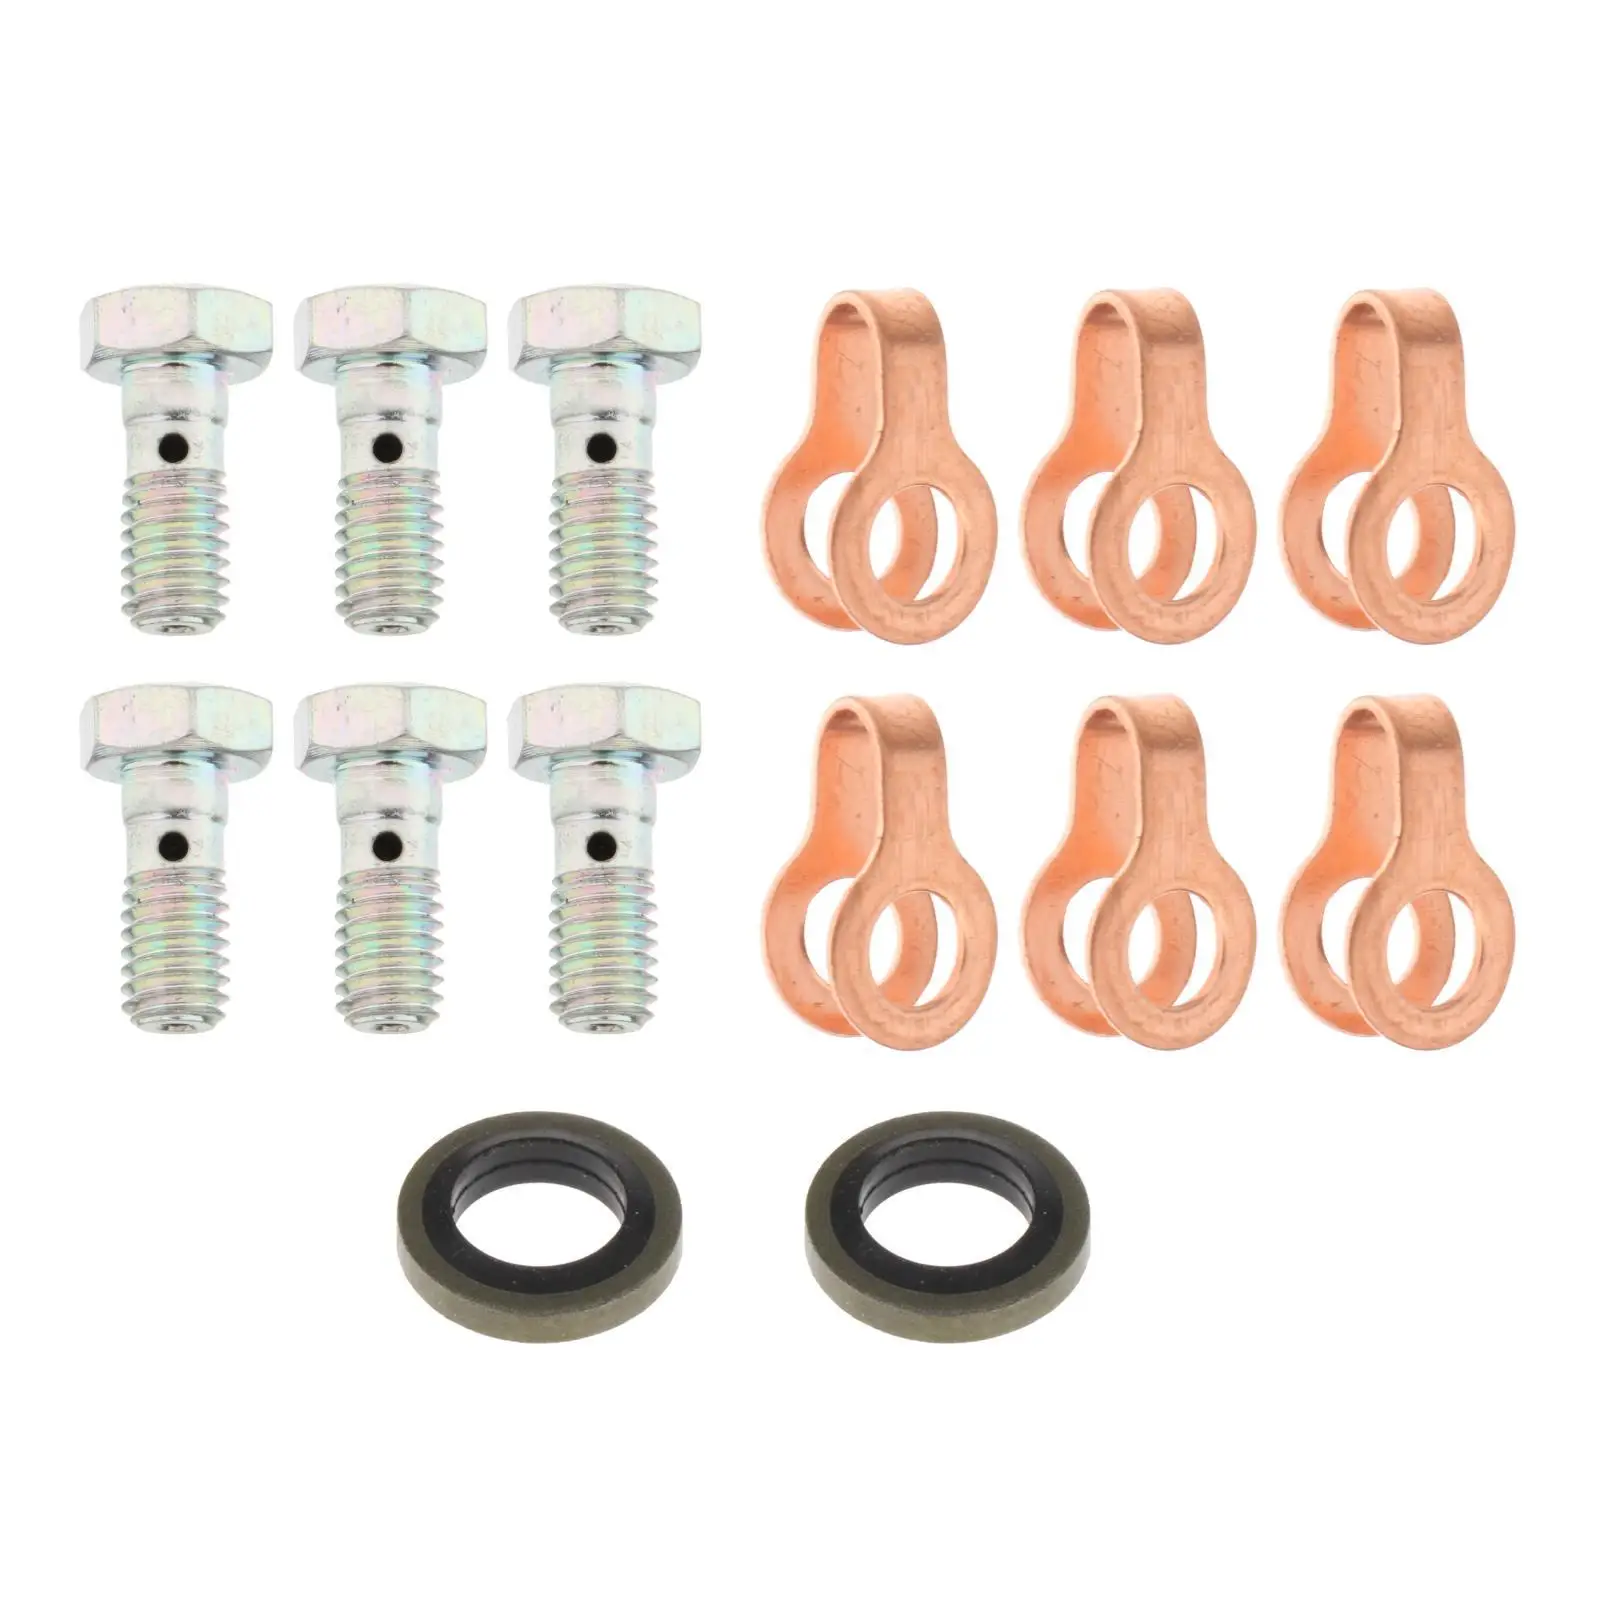 Fuel Return Line Banjo Bolts 3905307 Repair Accessories Car Replacement Set Engine Parts Fitting for Industrial 12V Engines